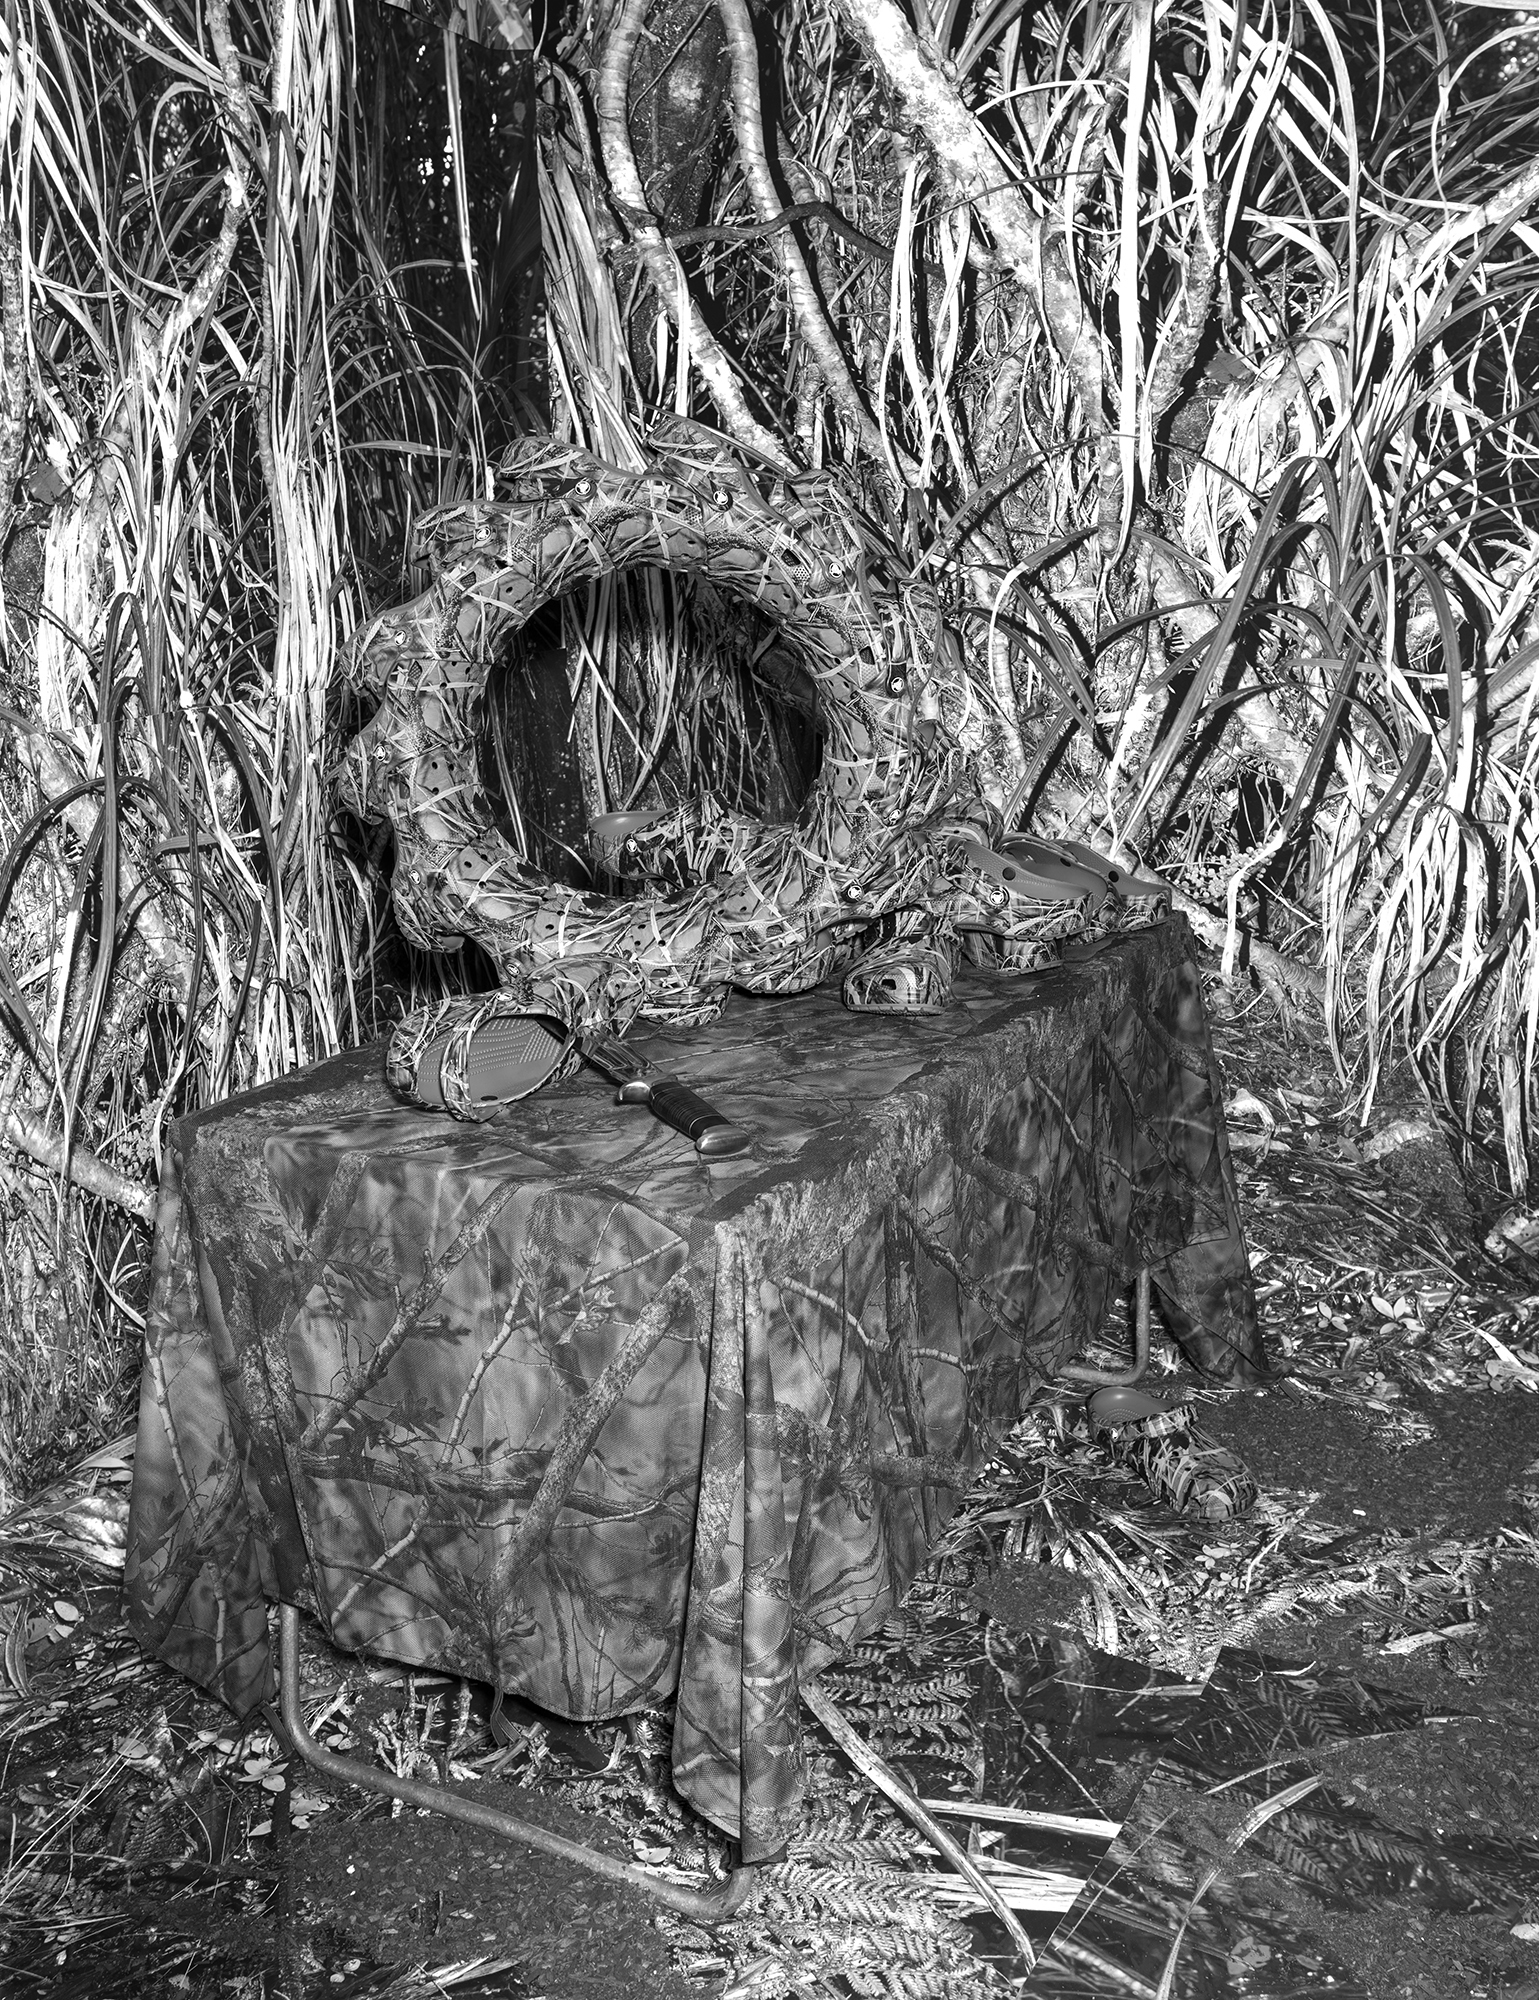 black-and-white image of camouflage gear used by hunters